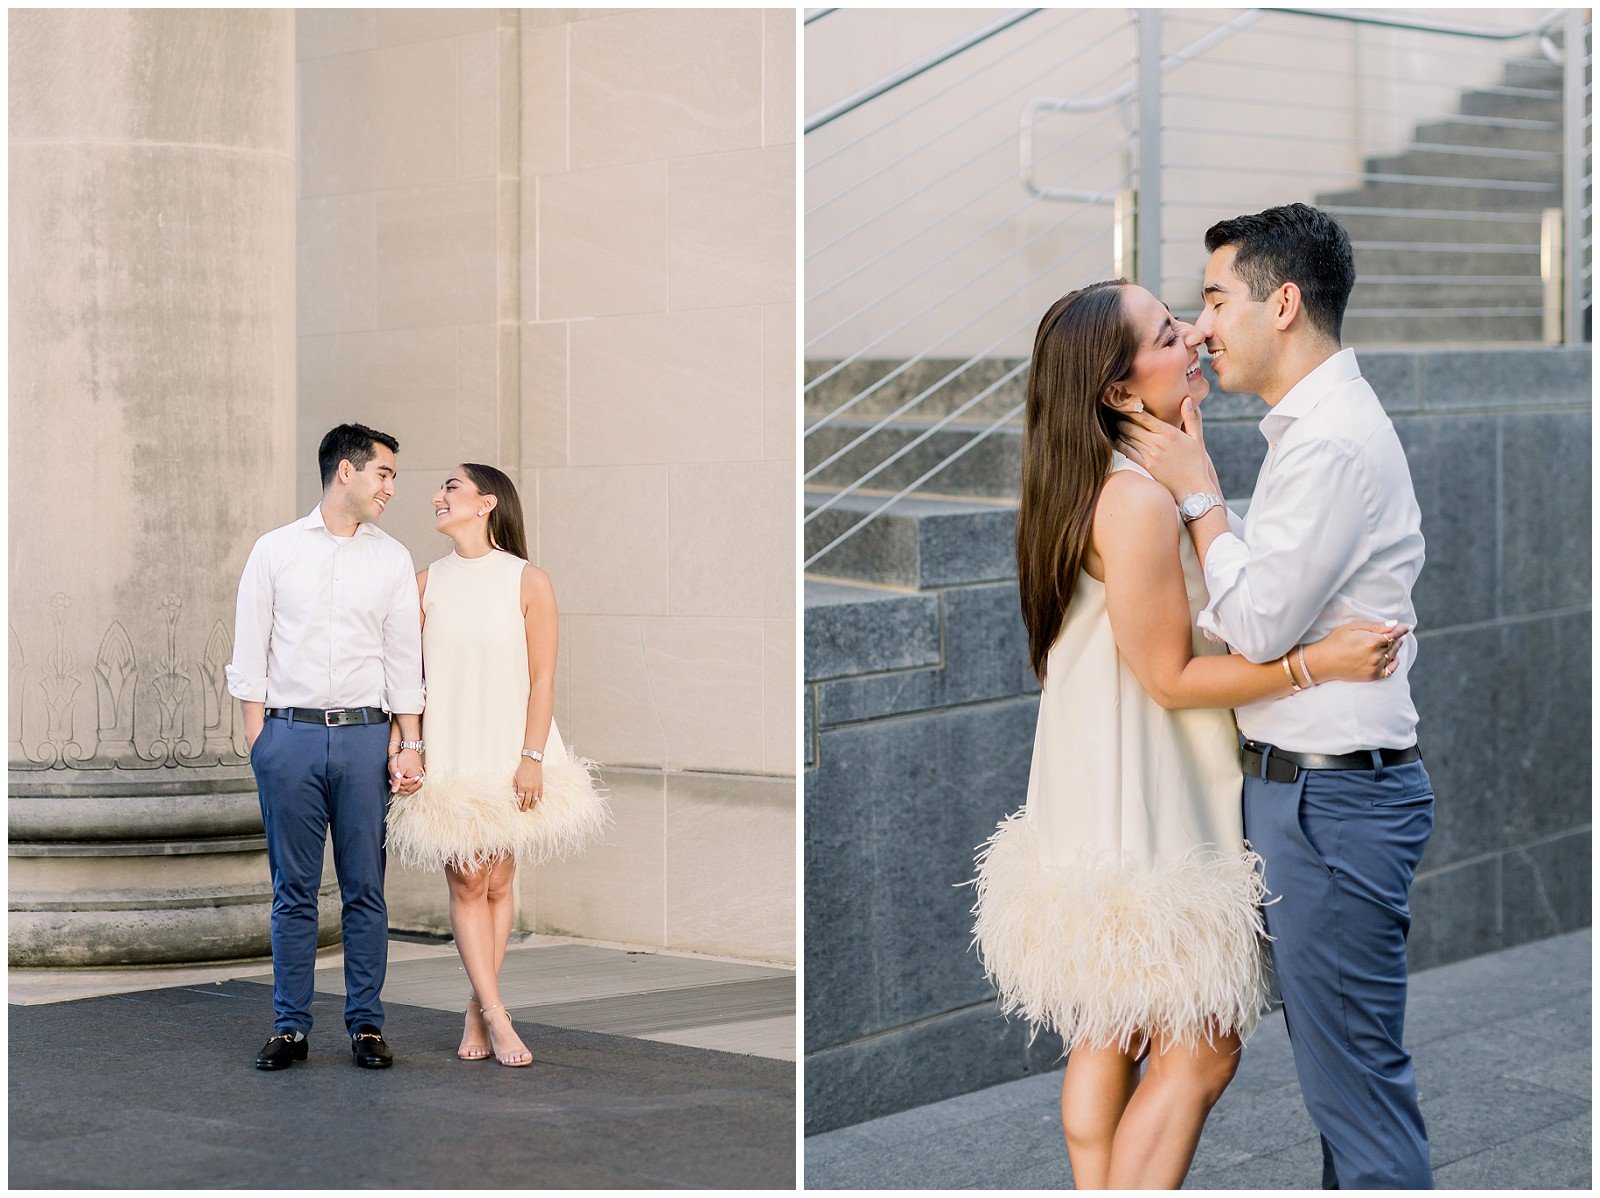 Summer-Engagement-Photos-at-The-Nelson-Atkins-K+S-0522-Elizabeth-Ladean-Photography-photo-_6468.jpg